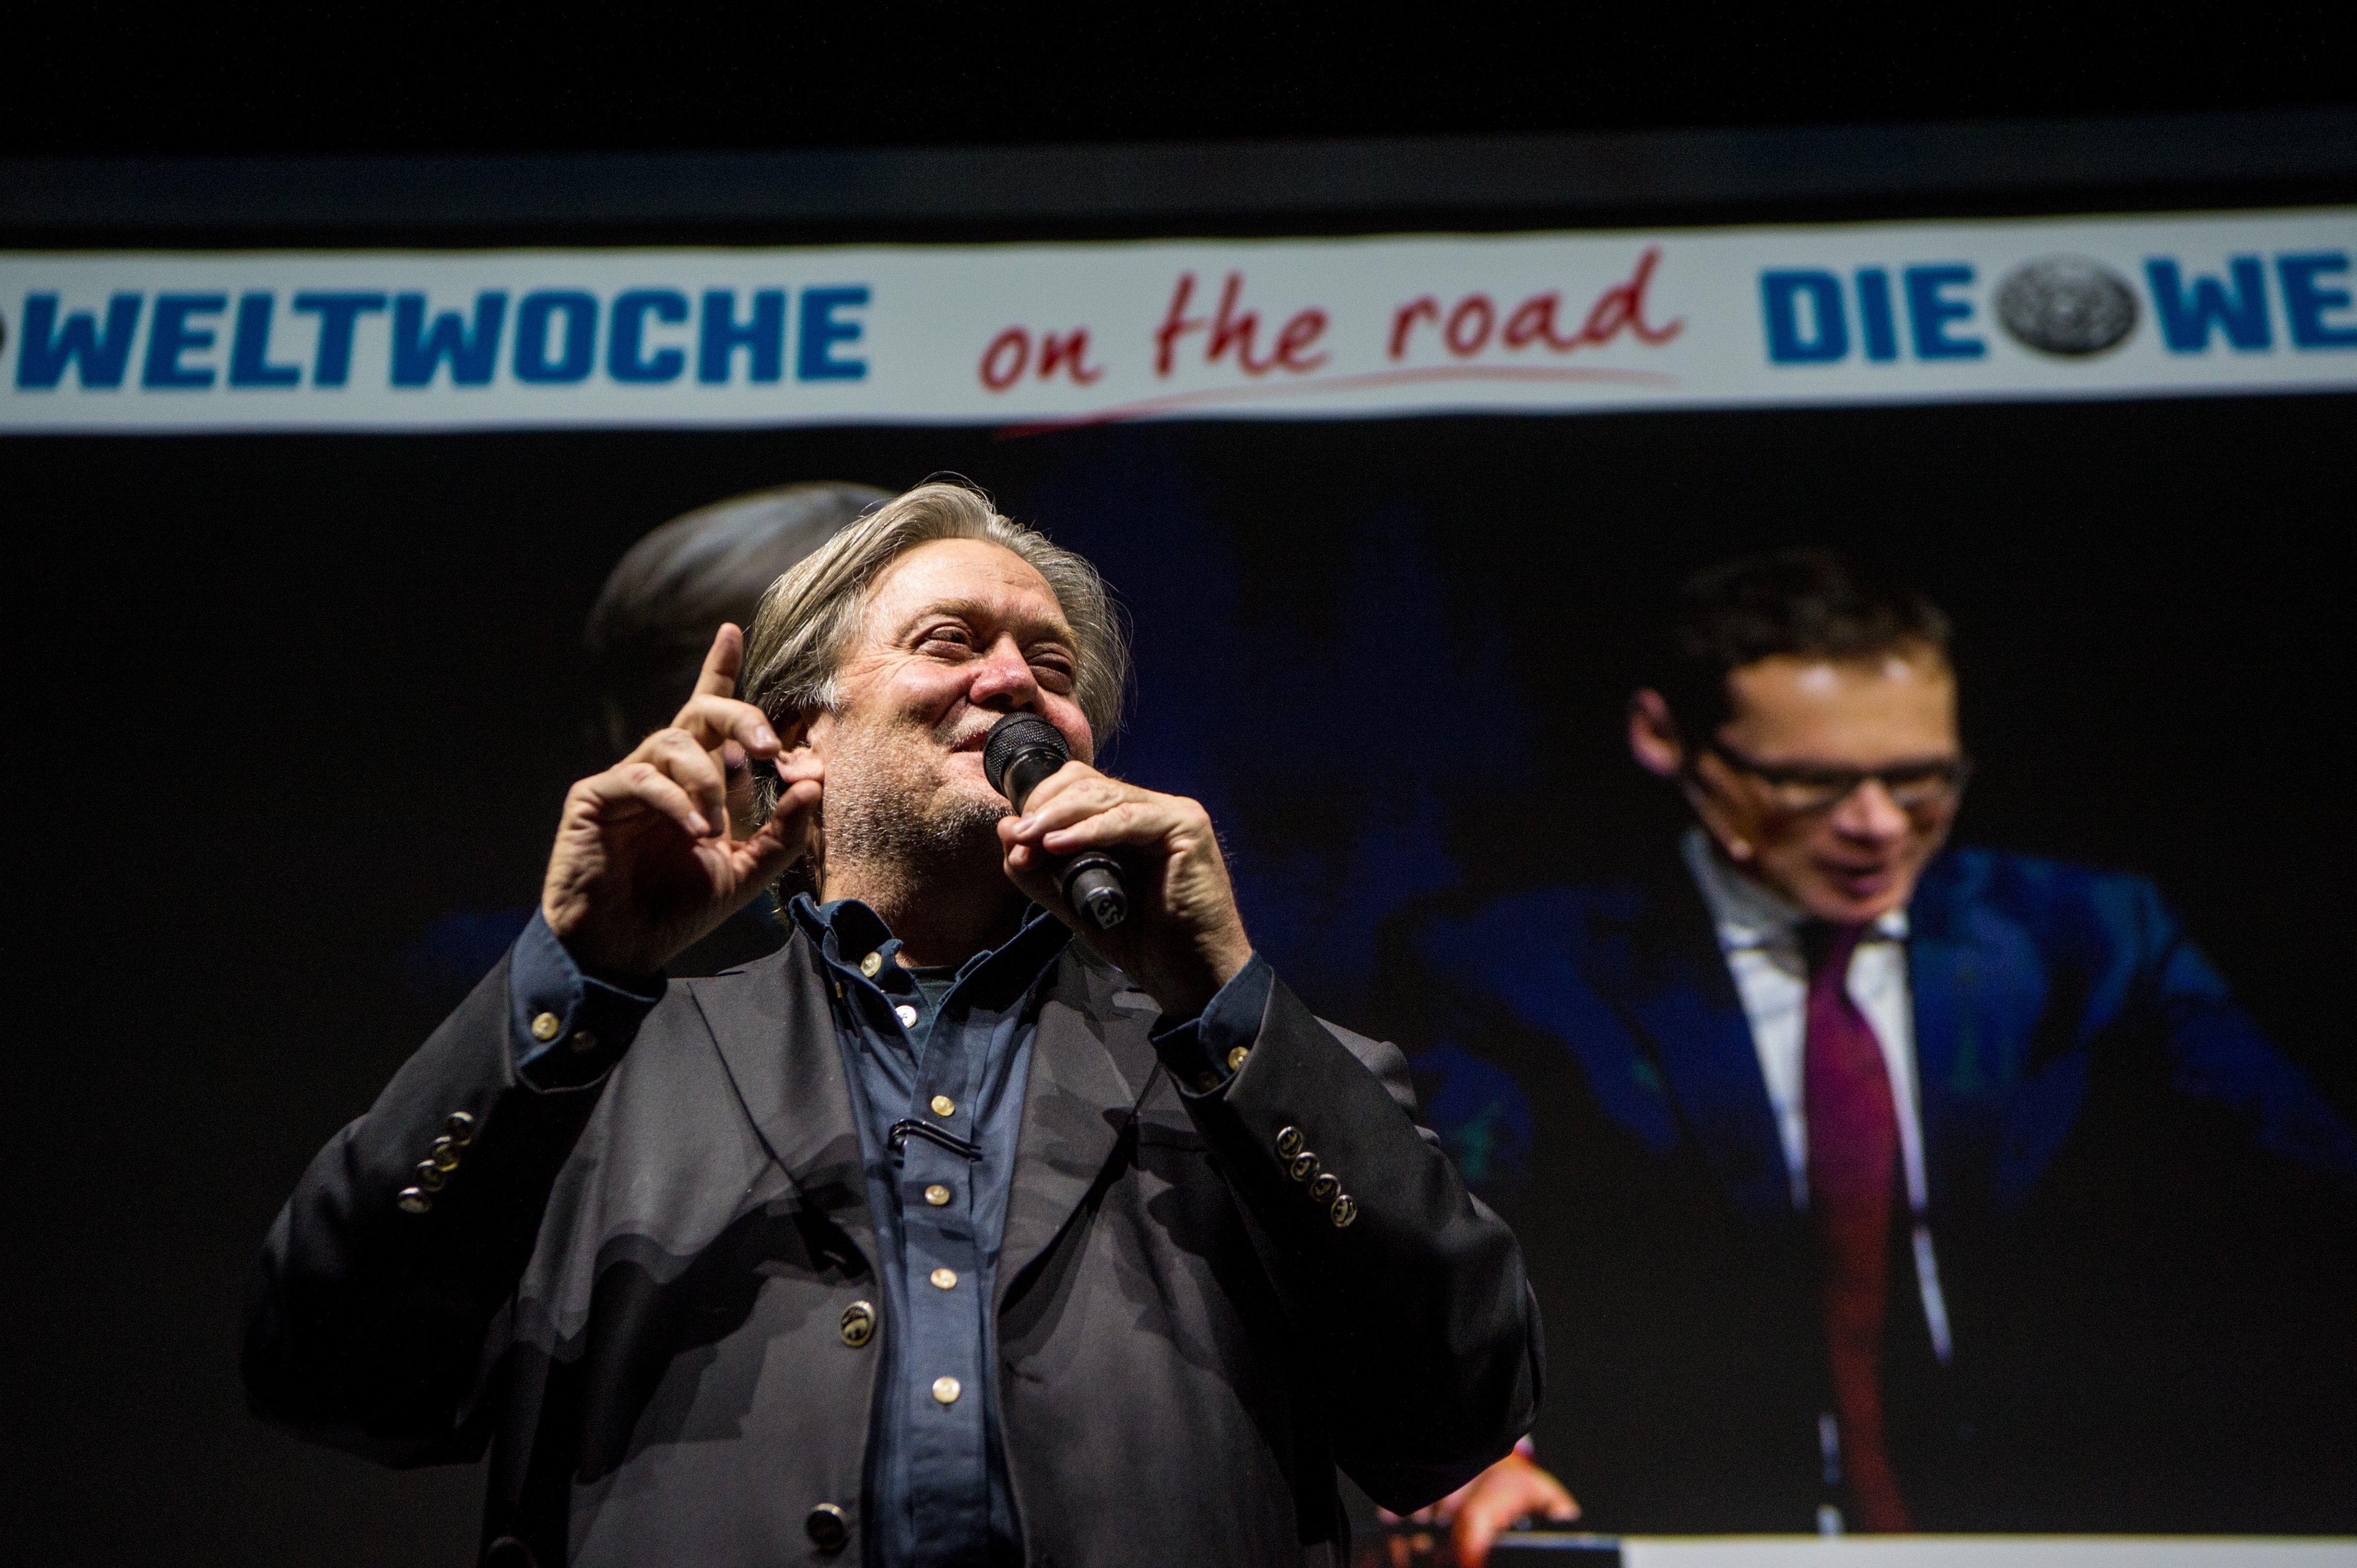 Steve Bannon, the former chief strategist for U.S. President Donald Trump, speaks at an event hosted by the right-wing Swiss weekly magazine Die Weltwoche on March 6, 2018 in Zurich, Switzerland (Adrian Bretscher—Getty Images)